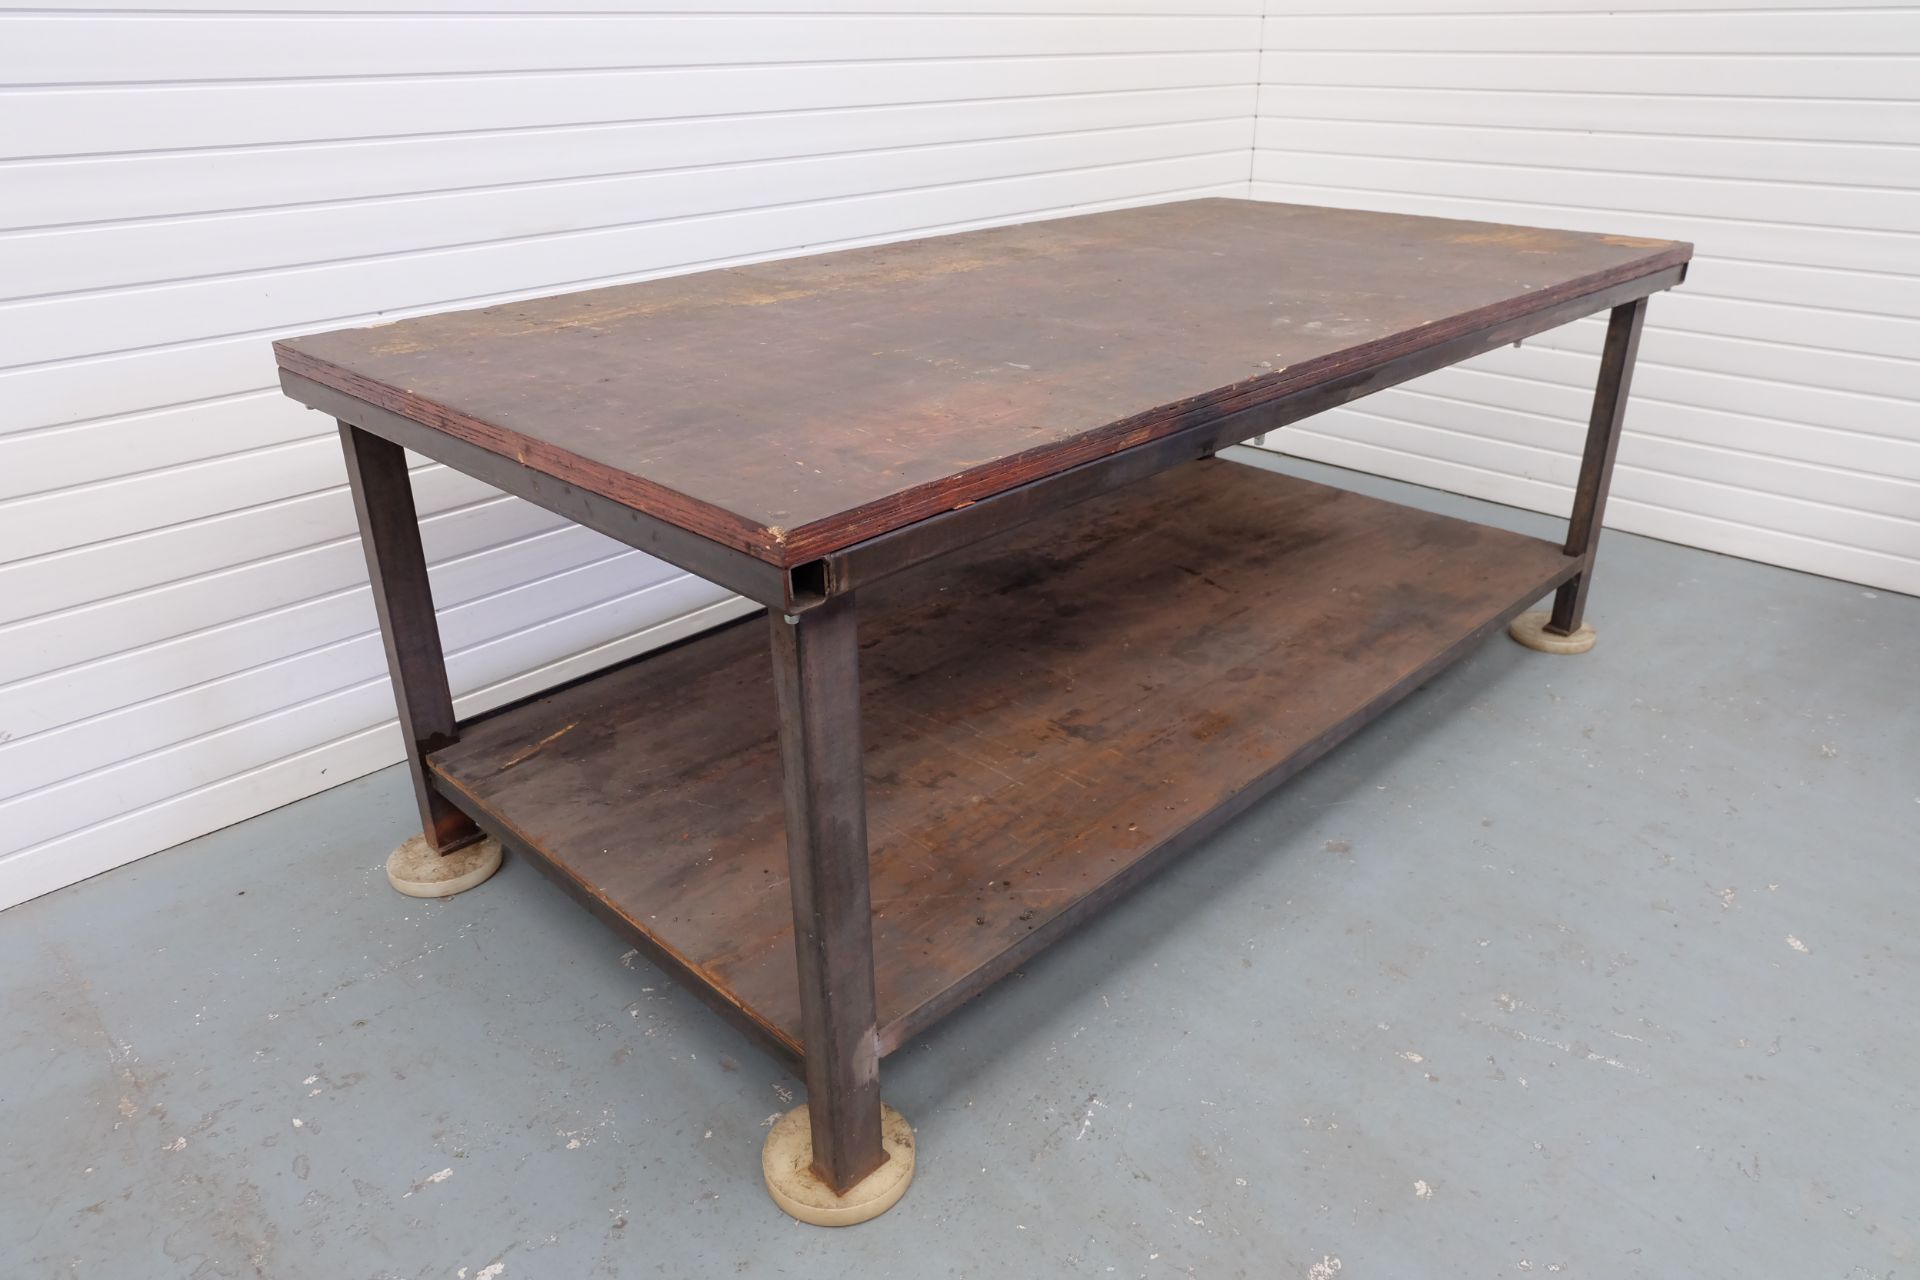 Heavy Duty Work Bench. Steel Frame With 1 1/2" Wooden Top. Size 8' x 4'. Height 35". - Image 3 of 6